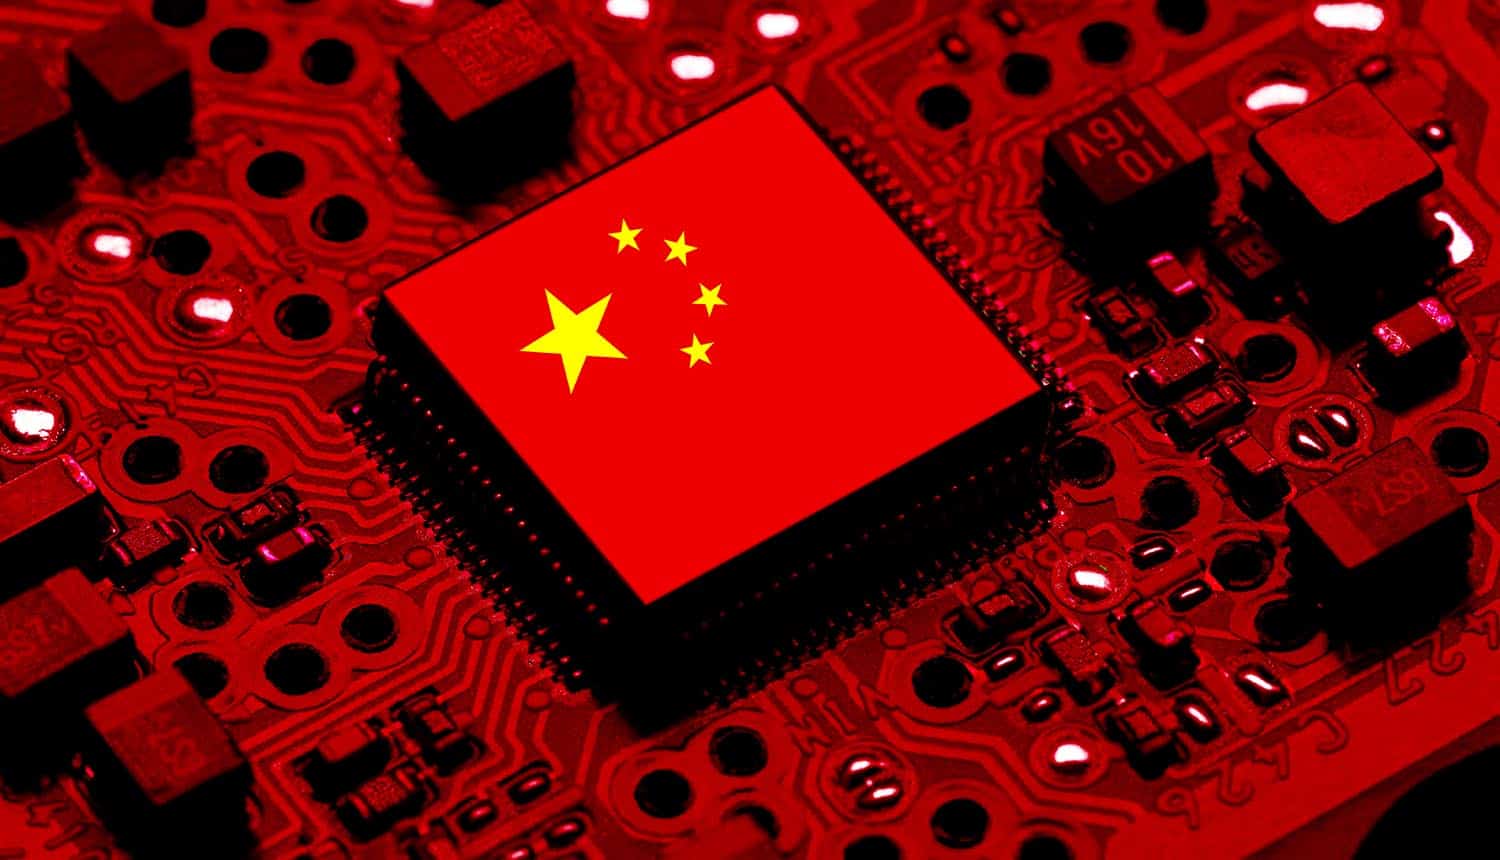 More Warnings From US and UK Officials on Chinese Cyber Threat: "Epoch-Defining Challenge" - CPO Magazine